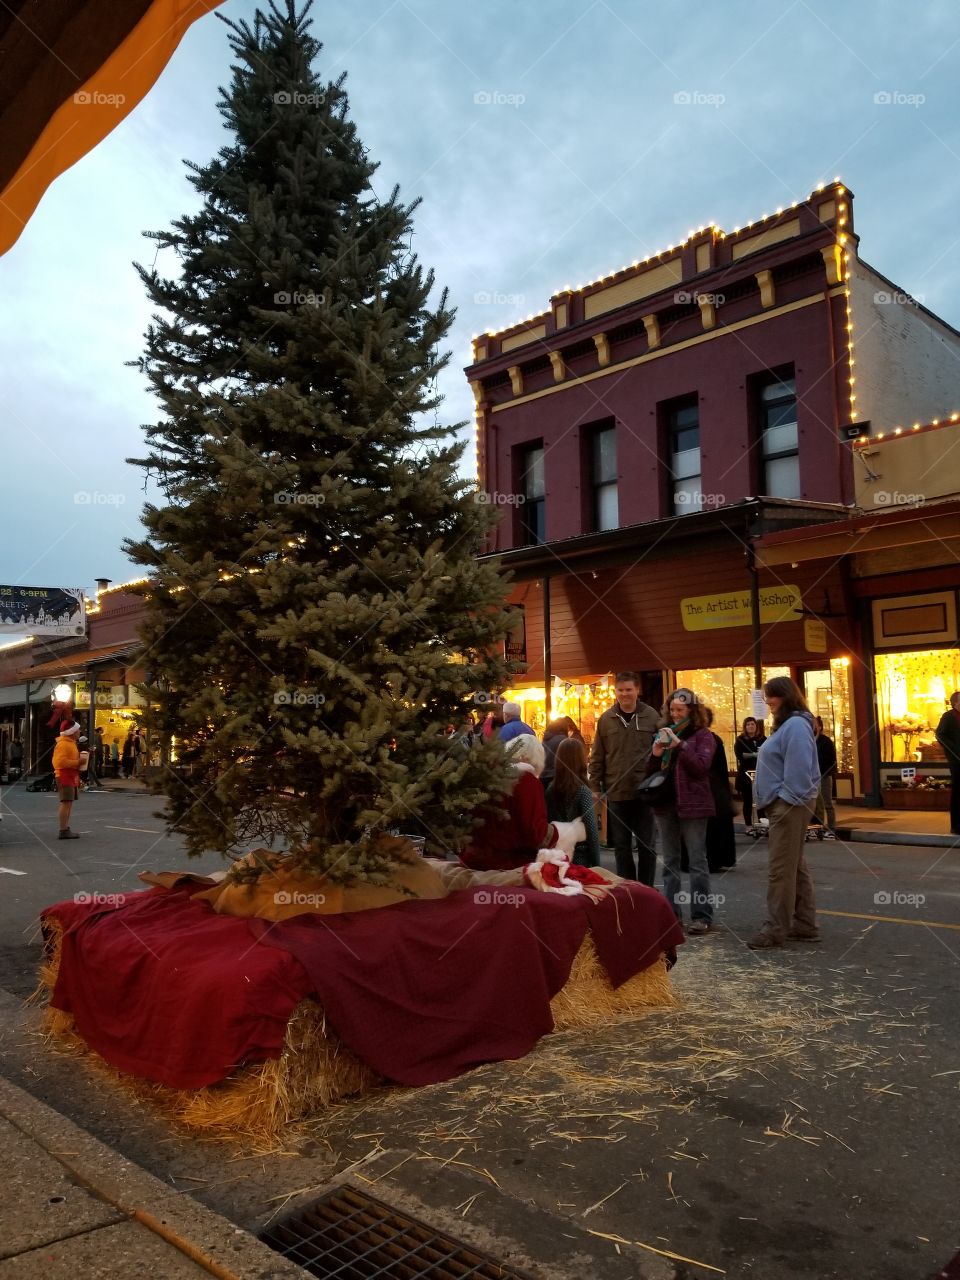 Meeting with Santa under the Christmas tree in an old town just seems so perfect